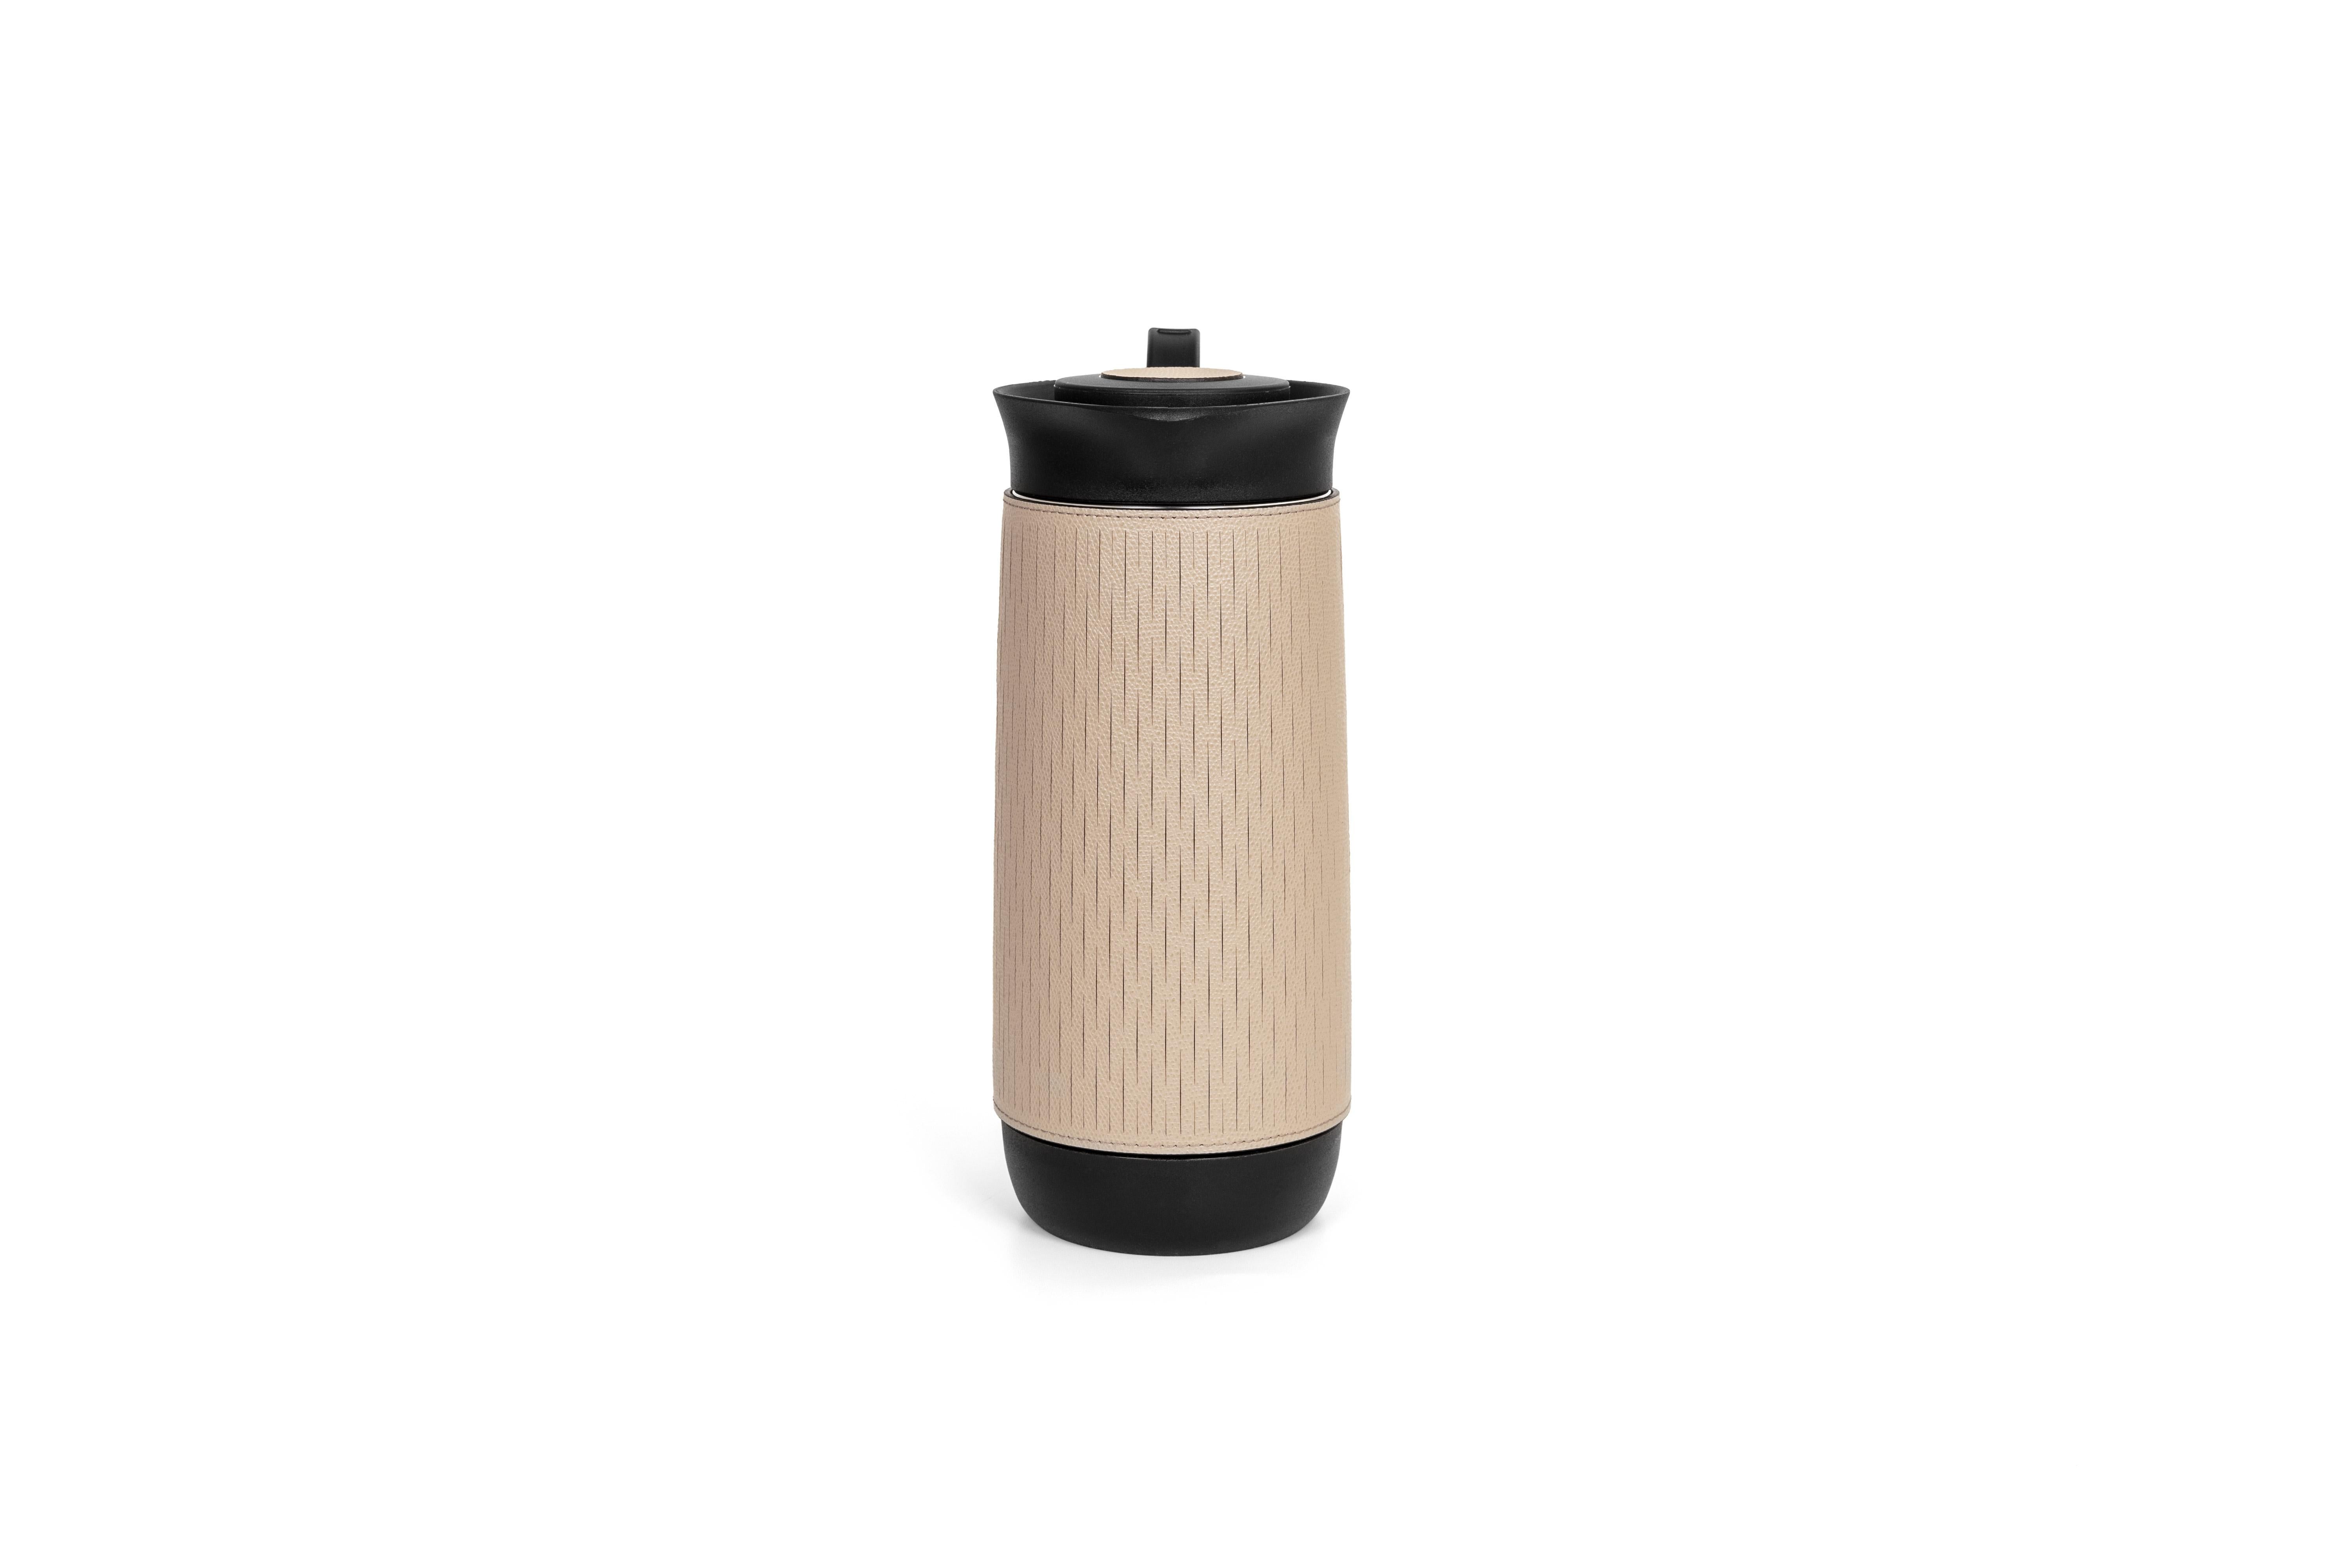 Mocha is the perfect vessel to keep piping hot or icy cold beverages right at arm’s reach.

Our new thermal carafe enhanced by a removable leather cover with glass inside is designed to keep your drinks hot for 6 hours and cold for 12. Who